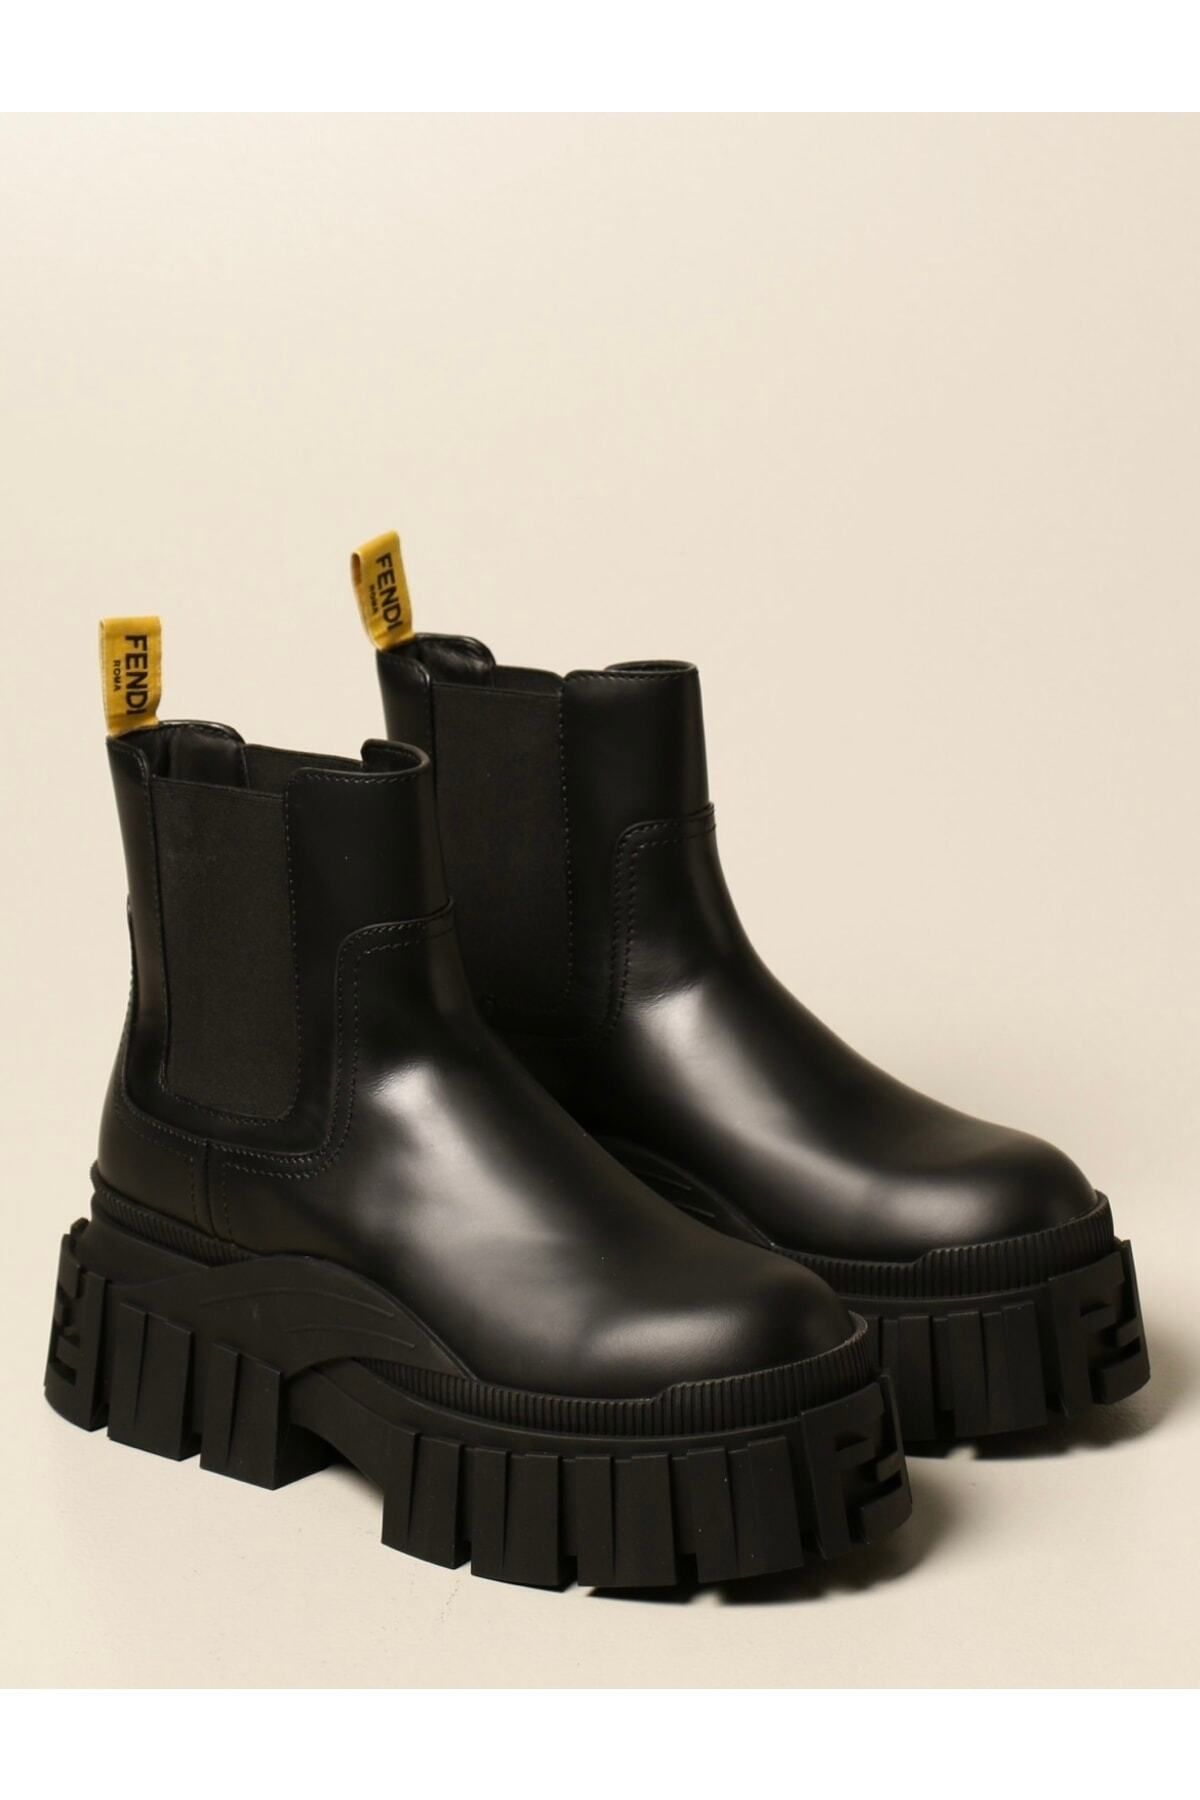 Fendi Leather Ankle Boot With Maxi Sole